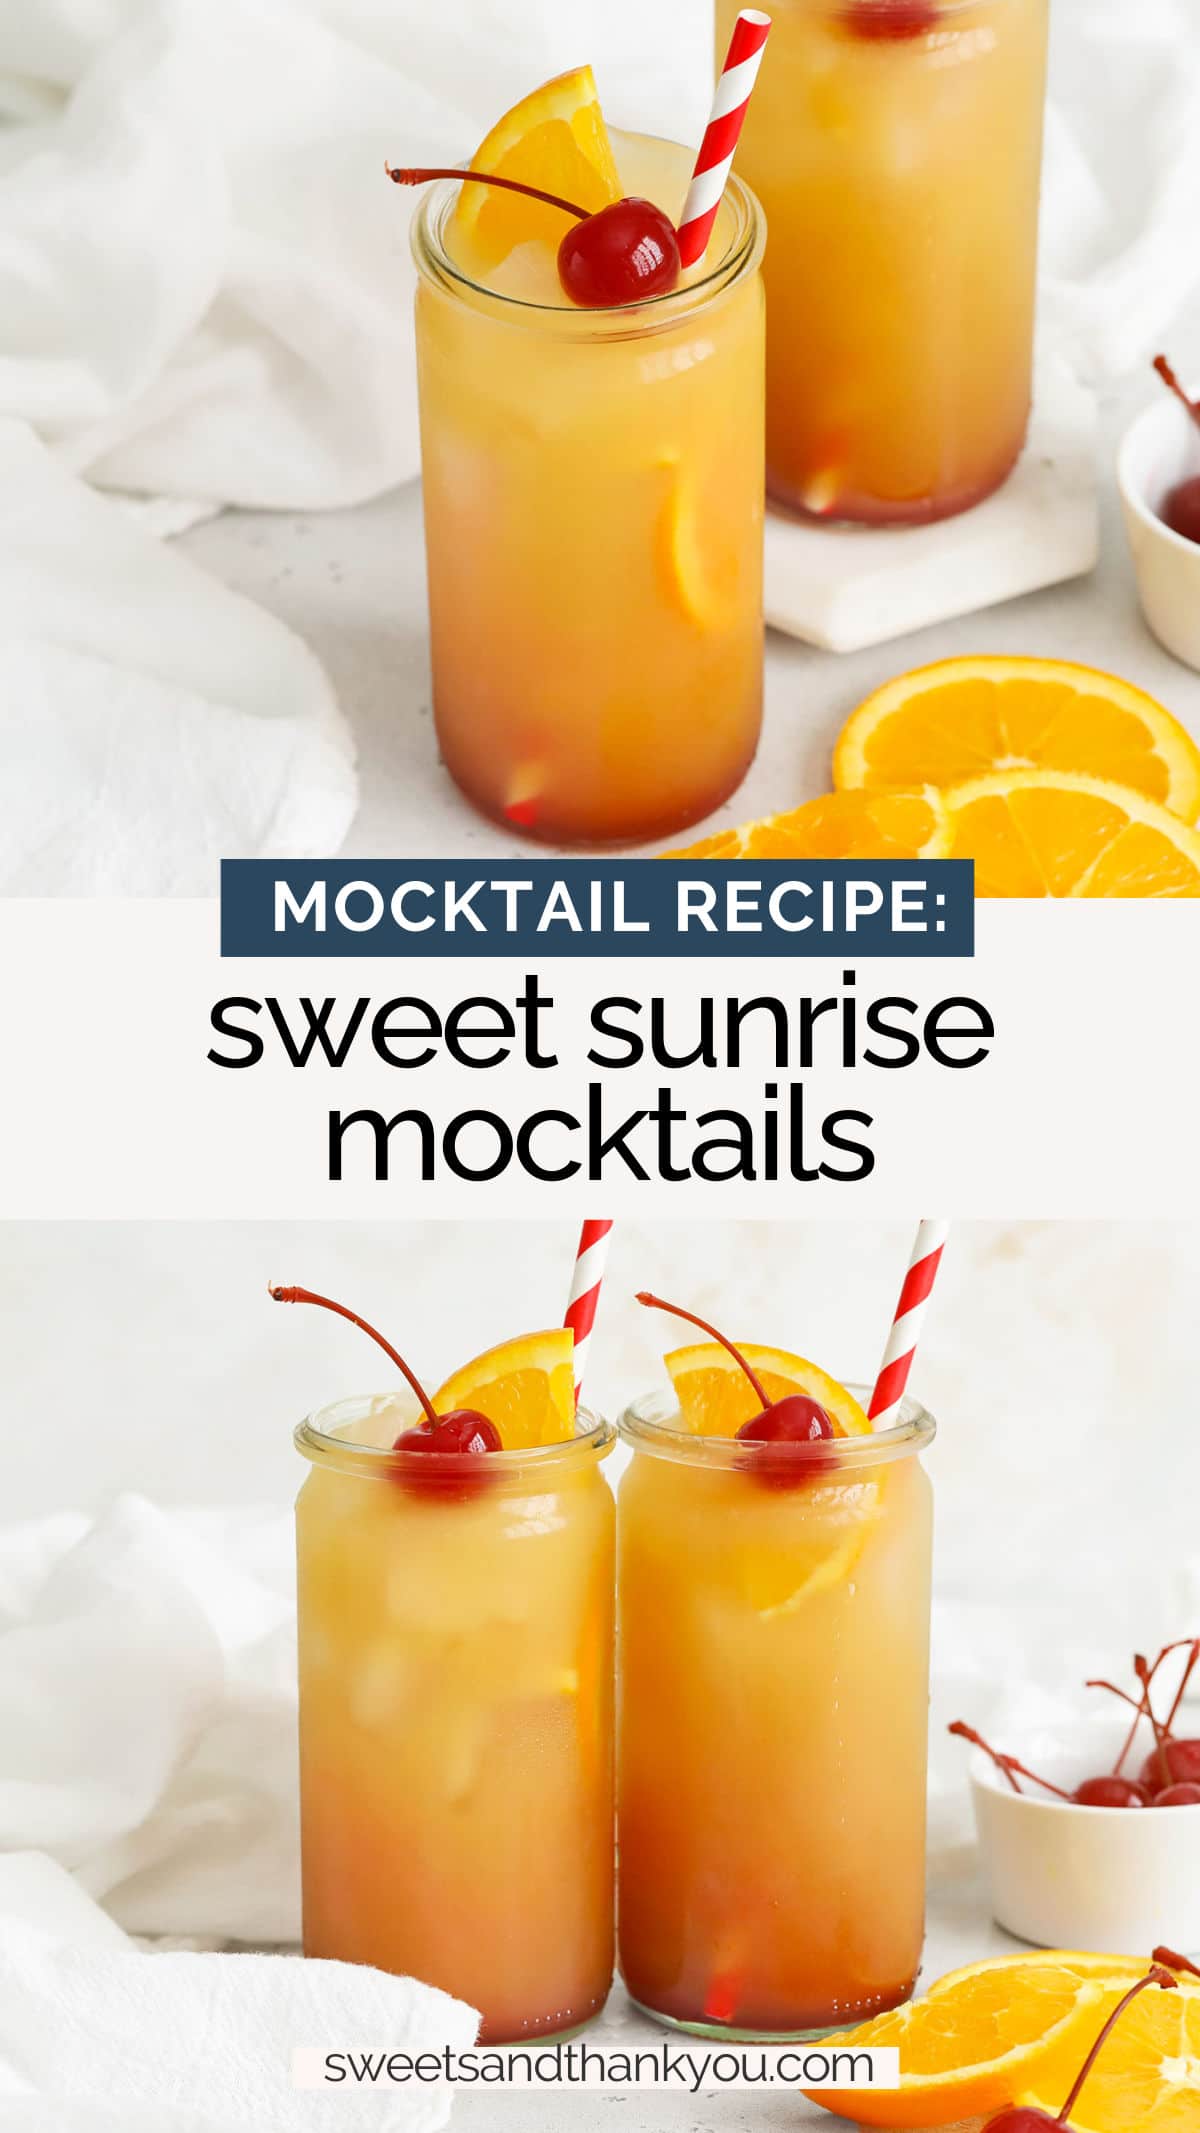 Sweet Sunrise Mocktail - This colorful virgin sunrise drink is as gorgeous as it is refreshing! It's the perfect sweet drink to sip for a special occasion. Non-alcoholic sunrise cocktail // sunrise mocktail recipe // orange juice grenadine mocktails // non alcoholic sunrise // grenadine mocktail recipe // mocktails with grenadine // virgin tequila sunrise // virgin sunrise drink // sunrise mocktail drink // orange juice mocktail // Sweets And Thank You Sunrise Mocktails